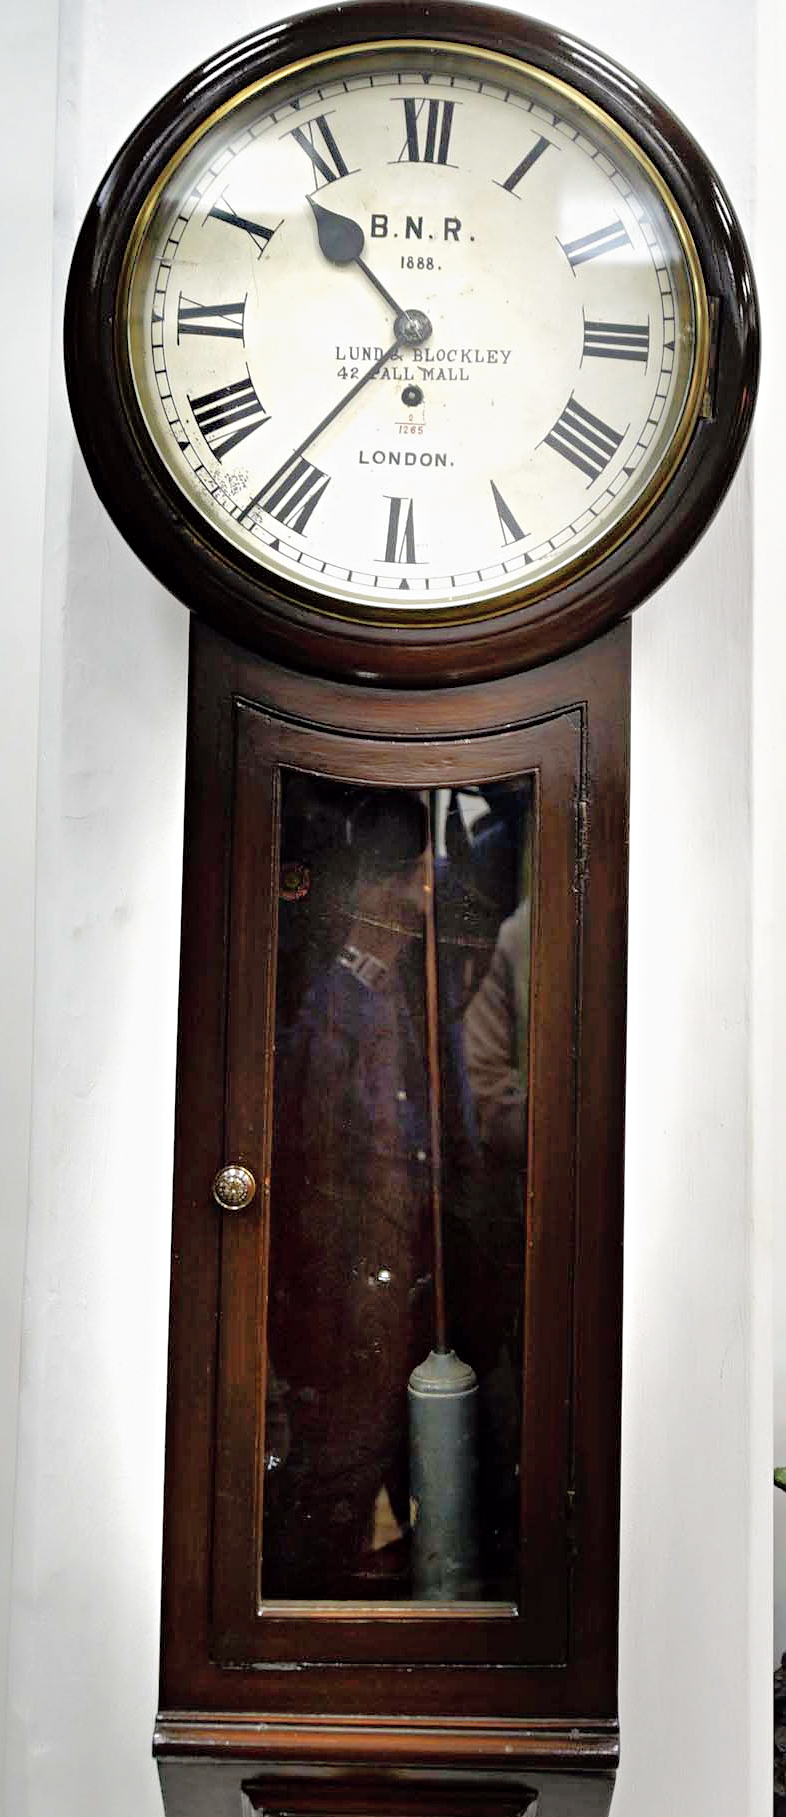 A clock made in London in 1888 inside the general manager’s office